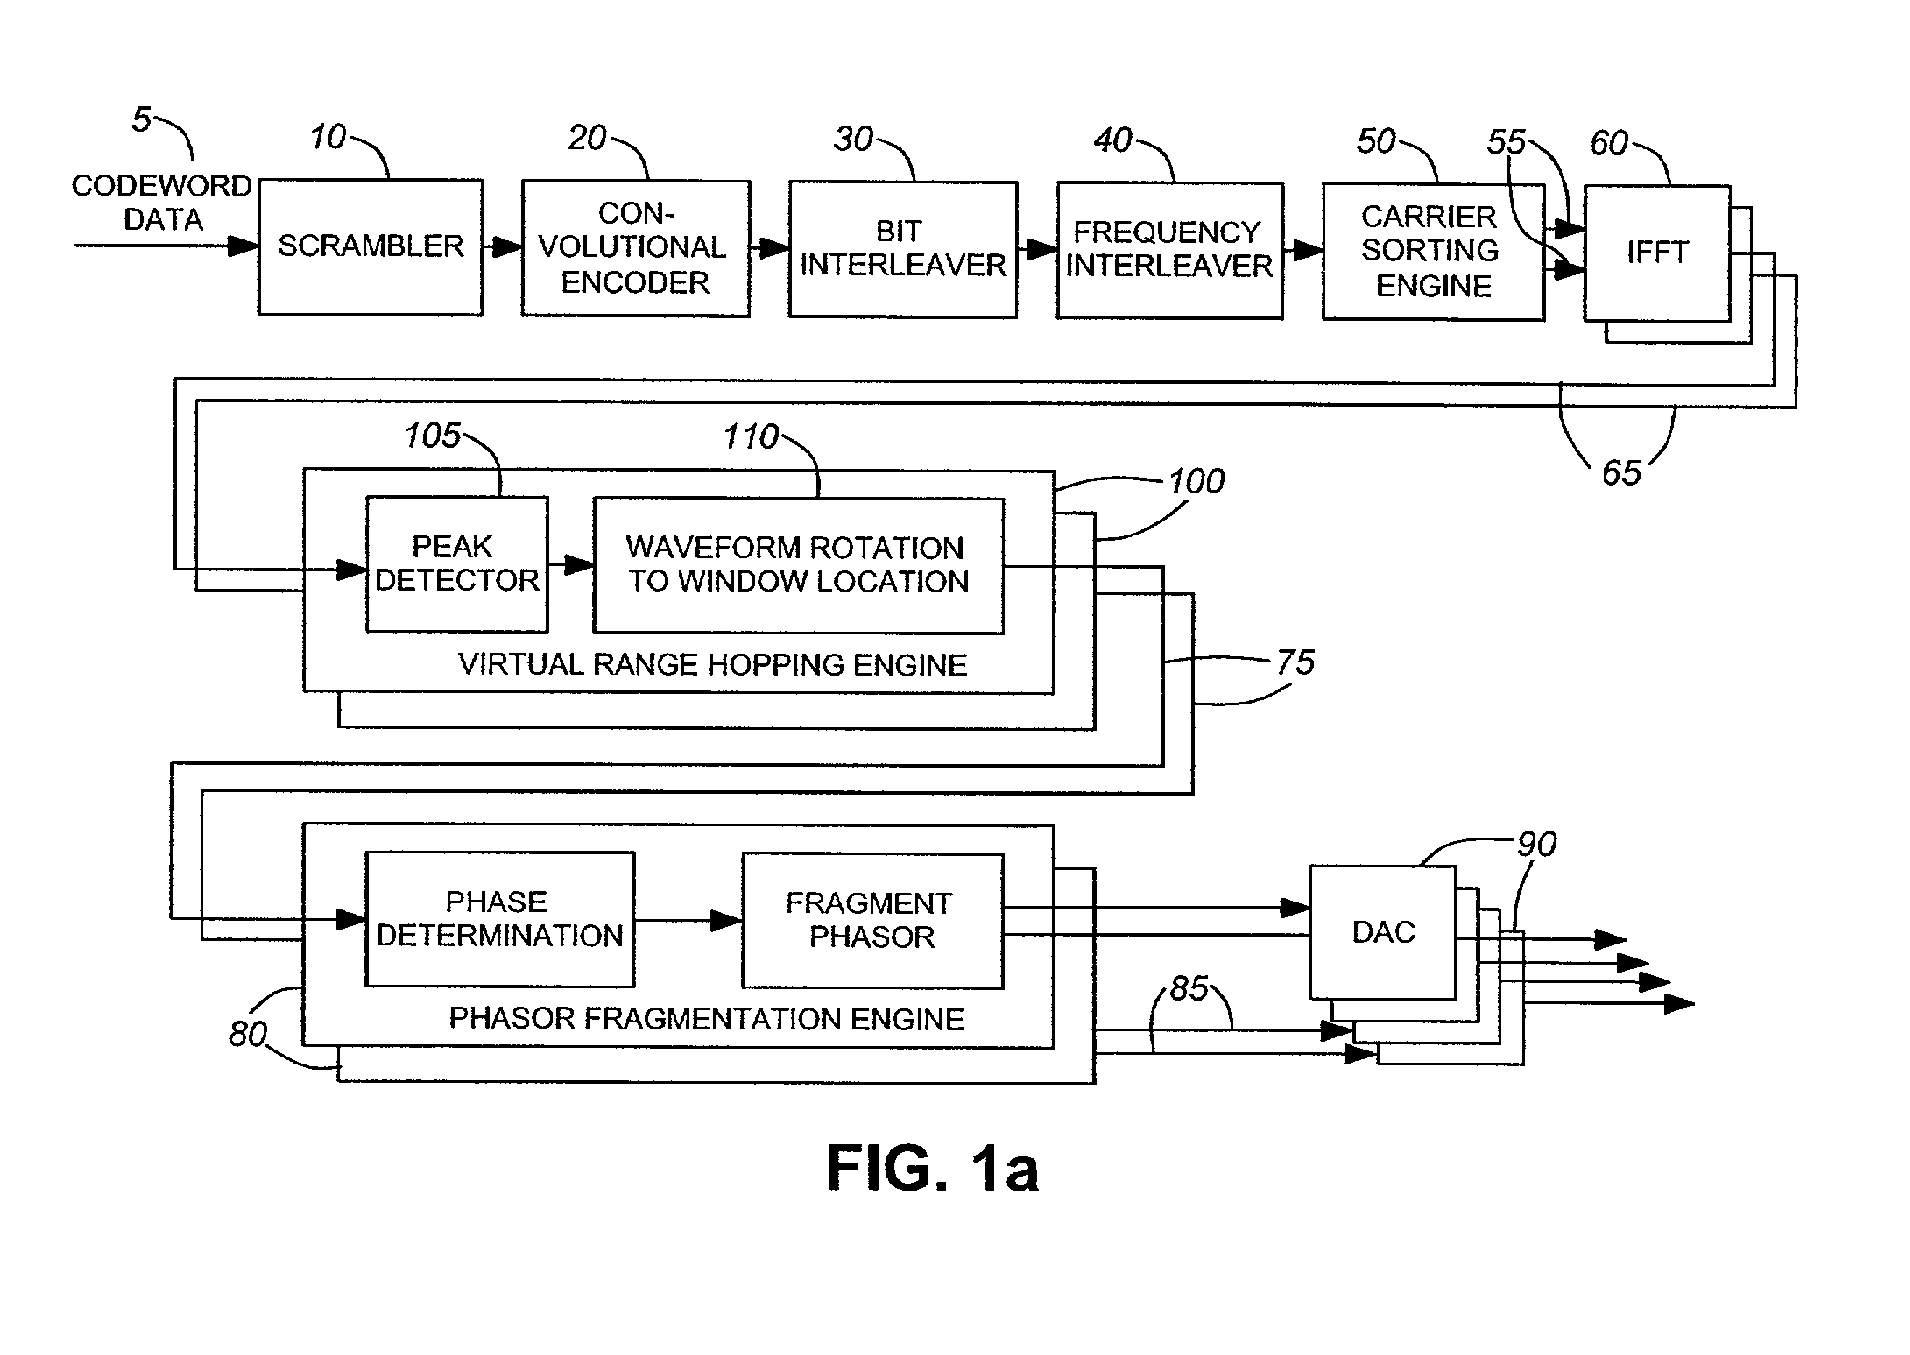 Computational circuits and methods for processing modulated signals having non-constant envelopes